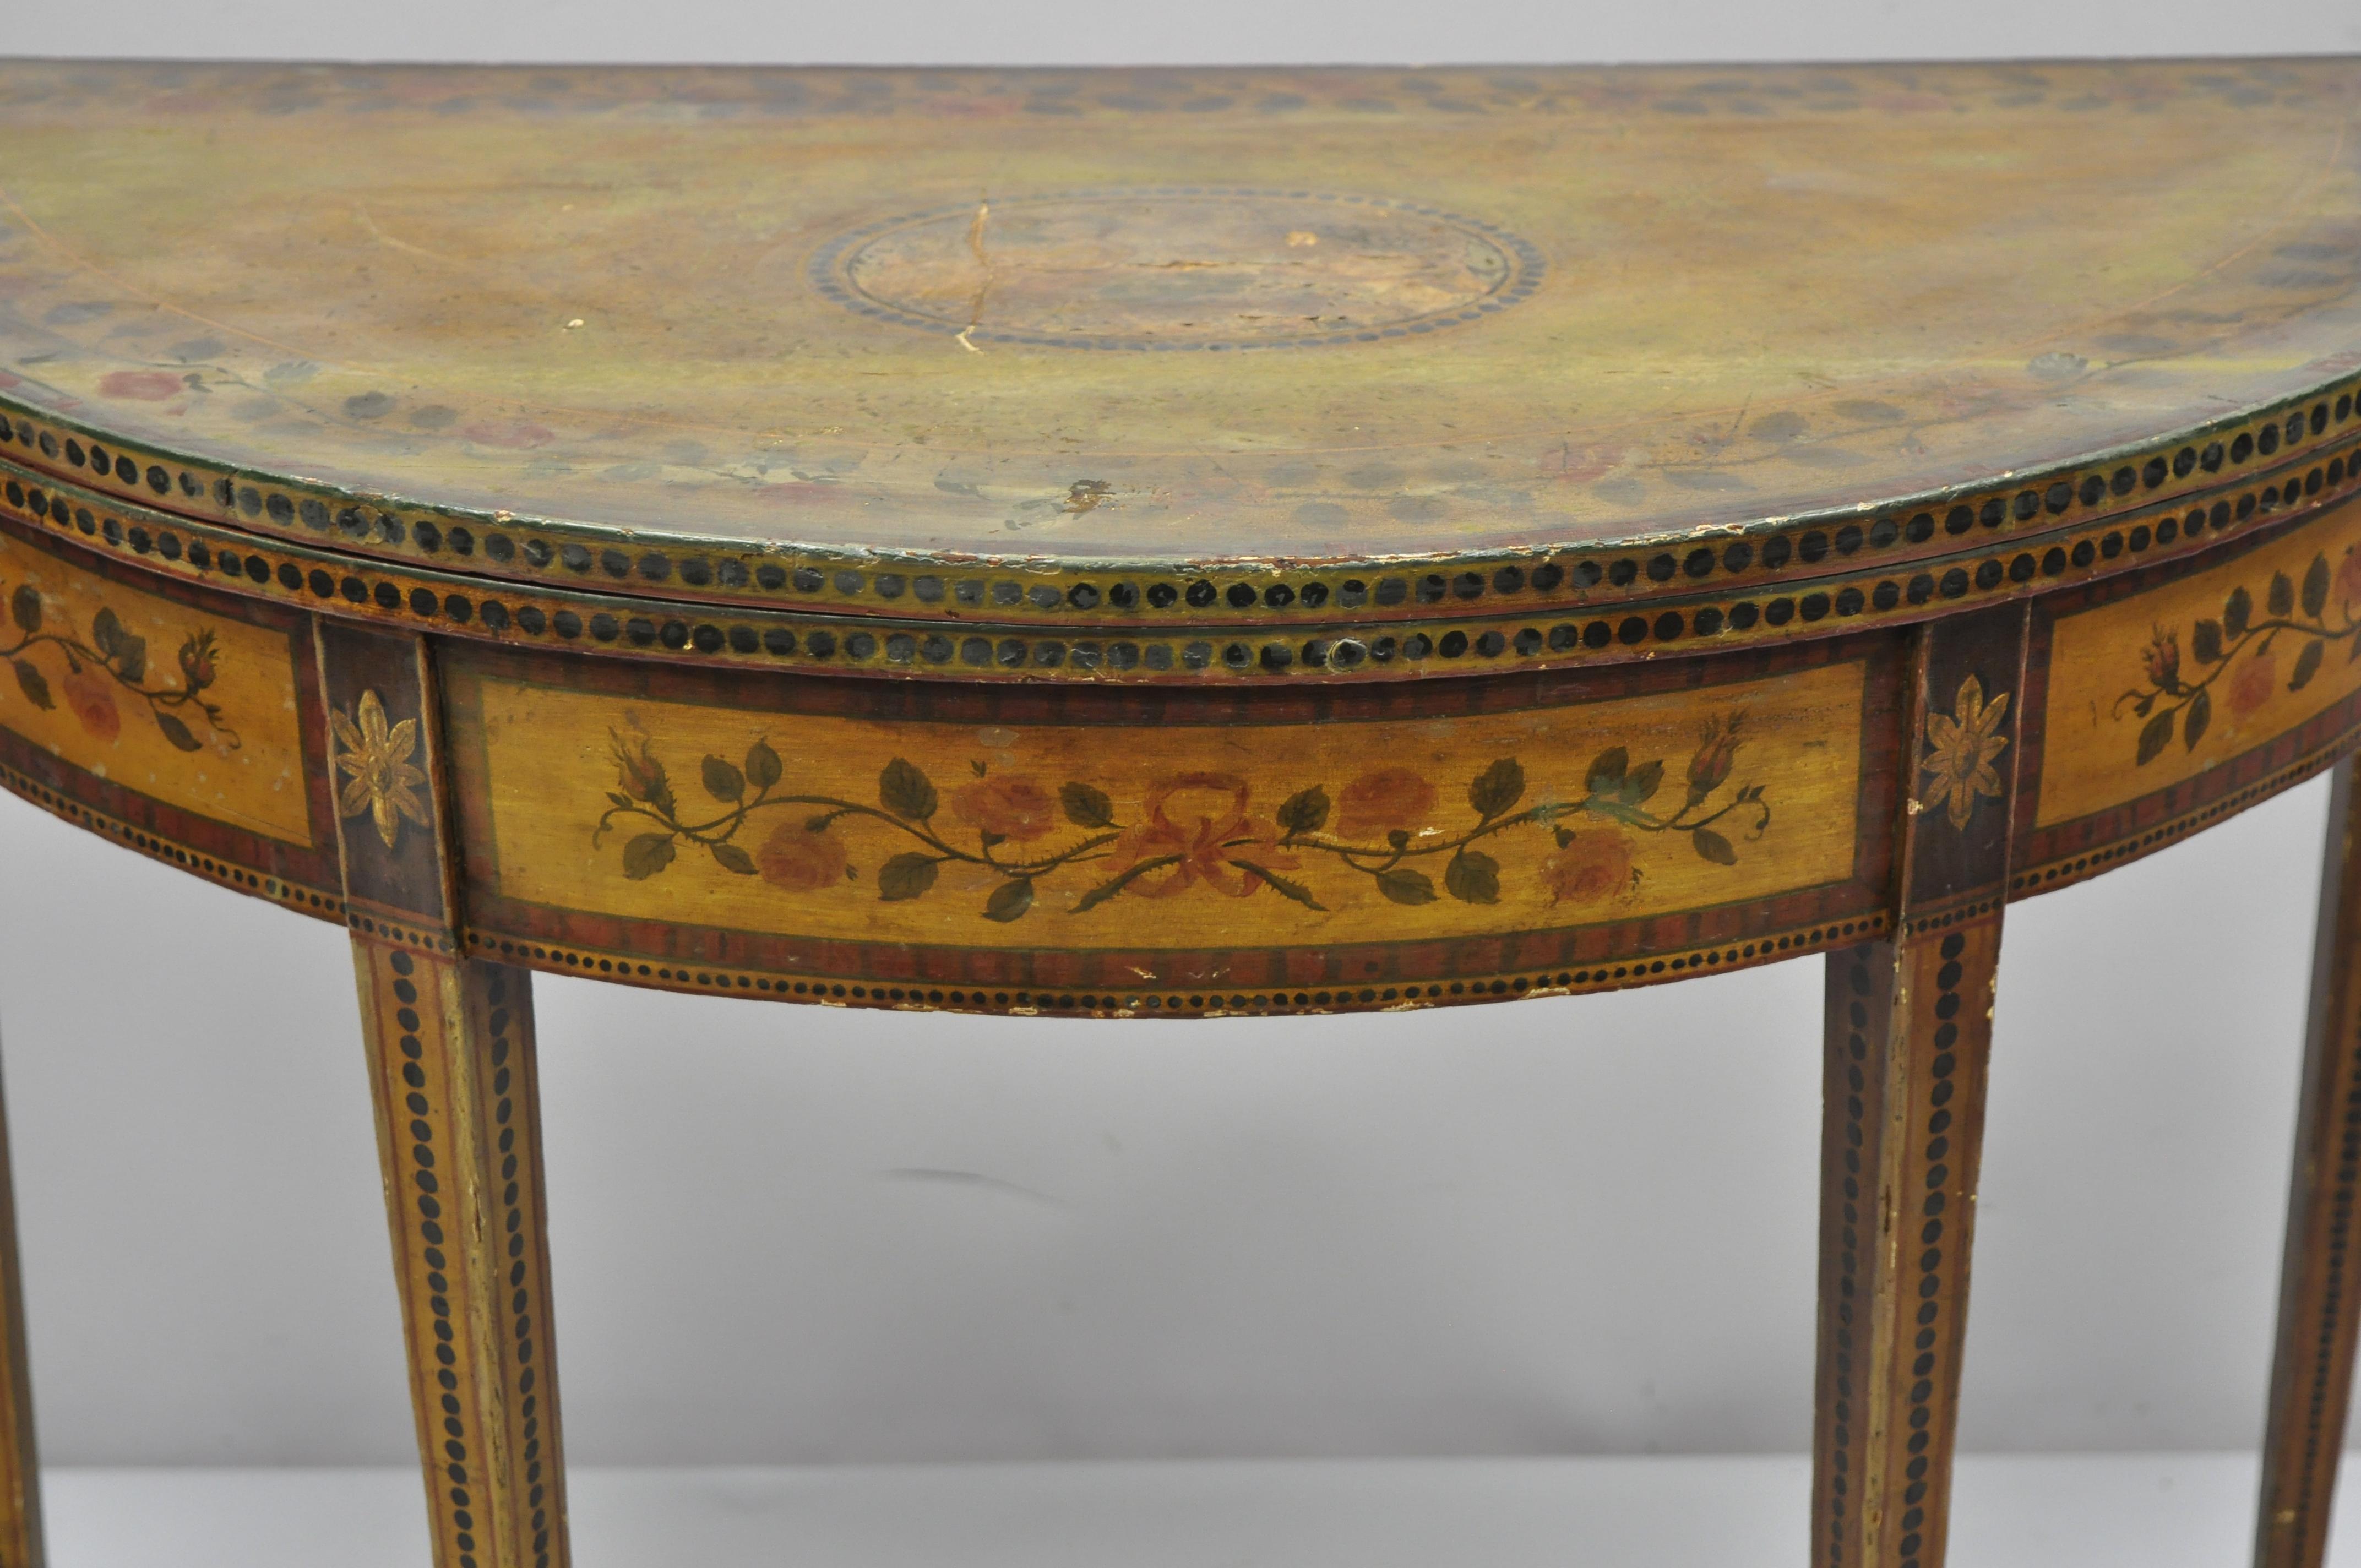 19th century English Edwardian Adams style polychrome painted demilune console game table. Item features hand painted floral and 